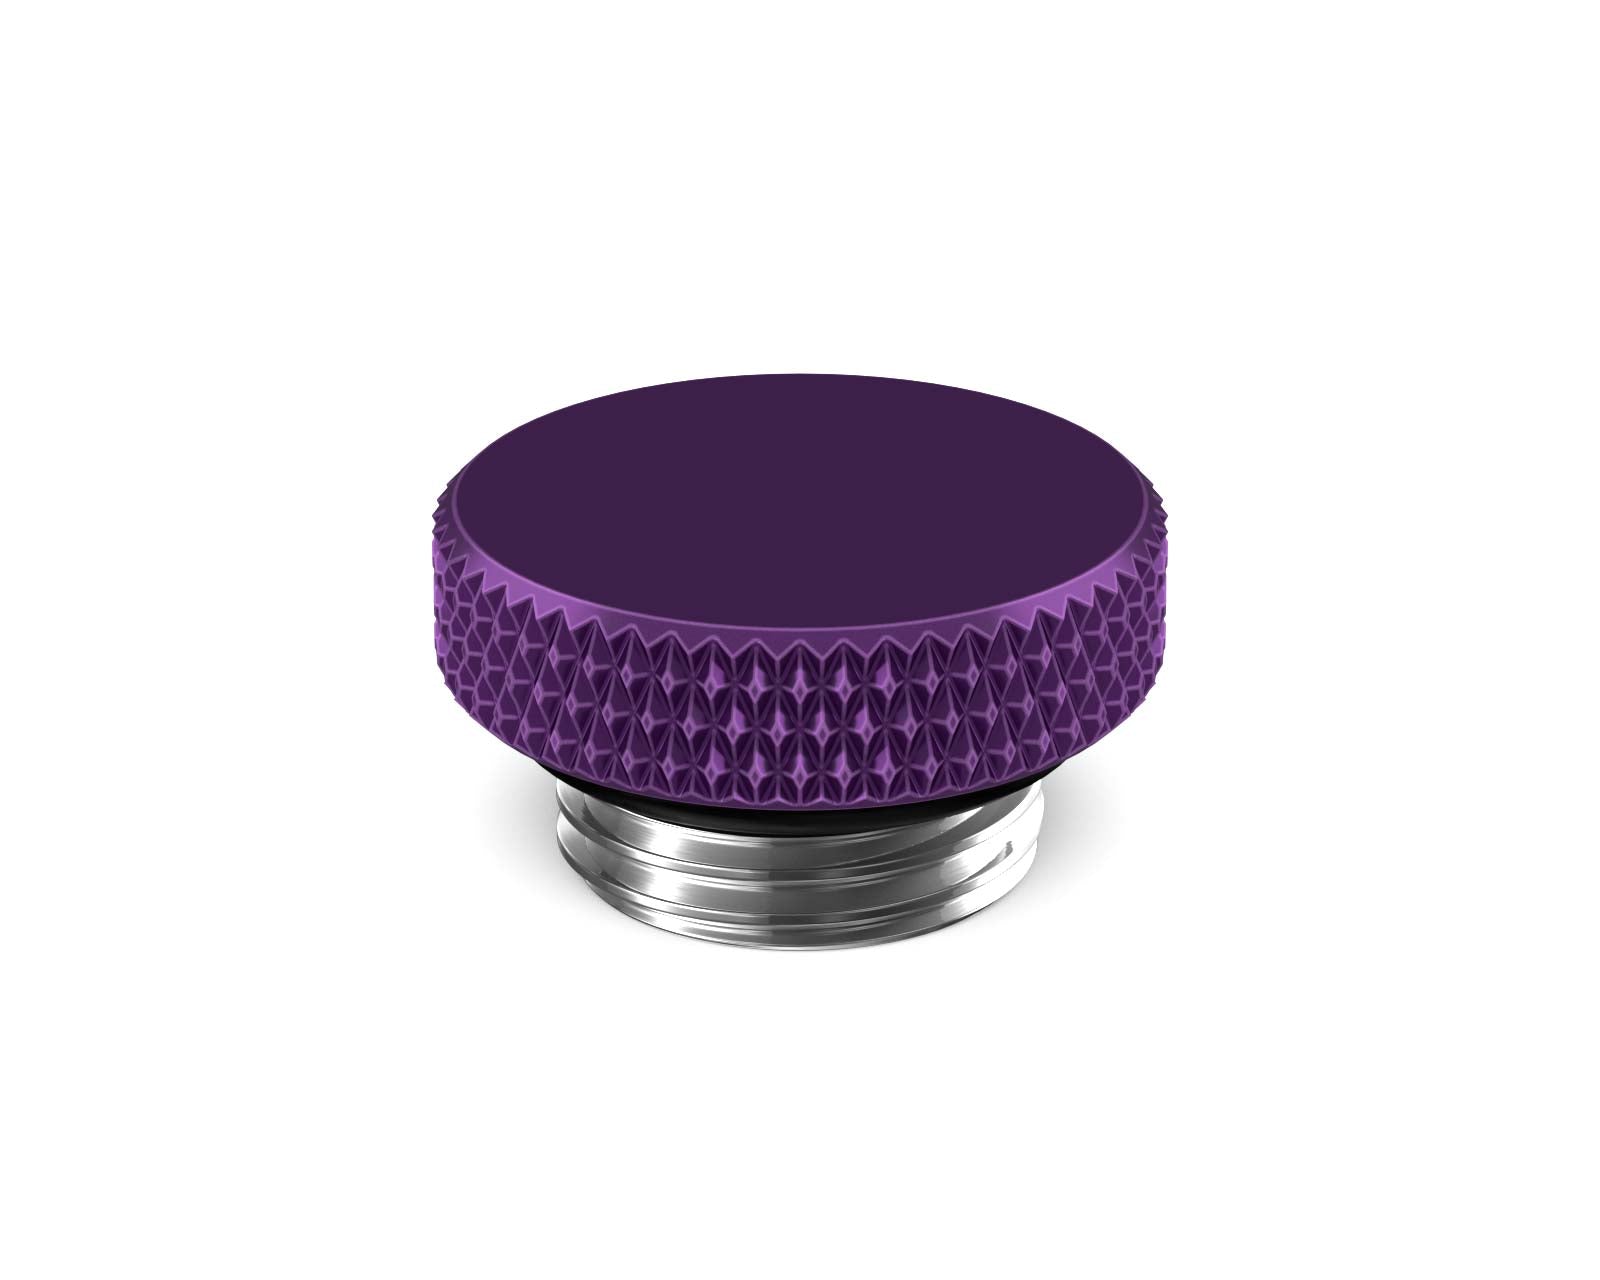 BSTOCK:PrimoChill G 1/4in. SX Knurled Nickel Stop Fitting (No slot) - Candy Purple - PrimoChill - KEEPING IT COOL